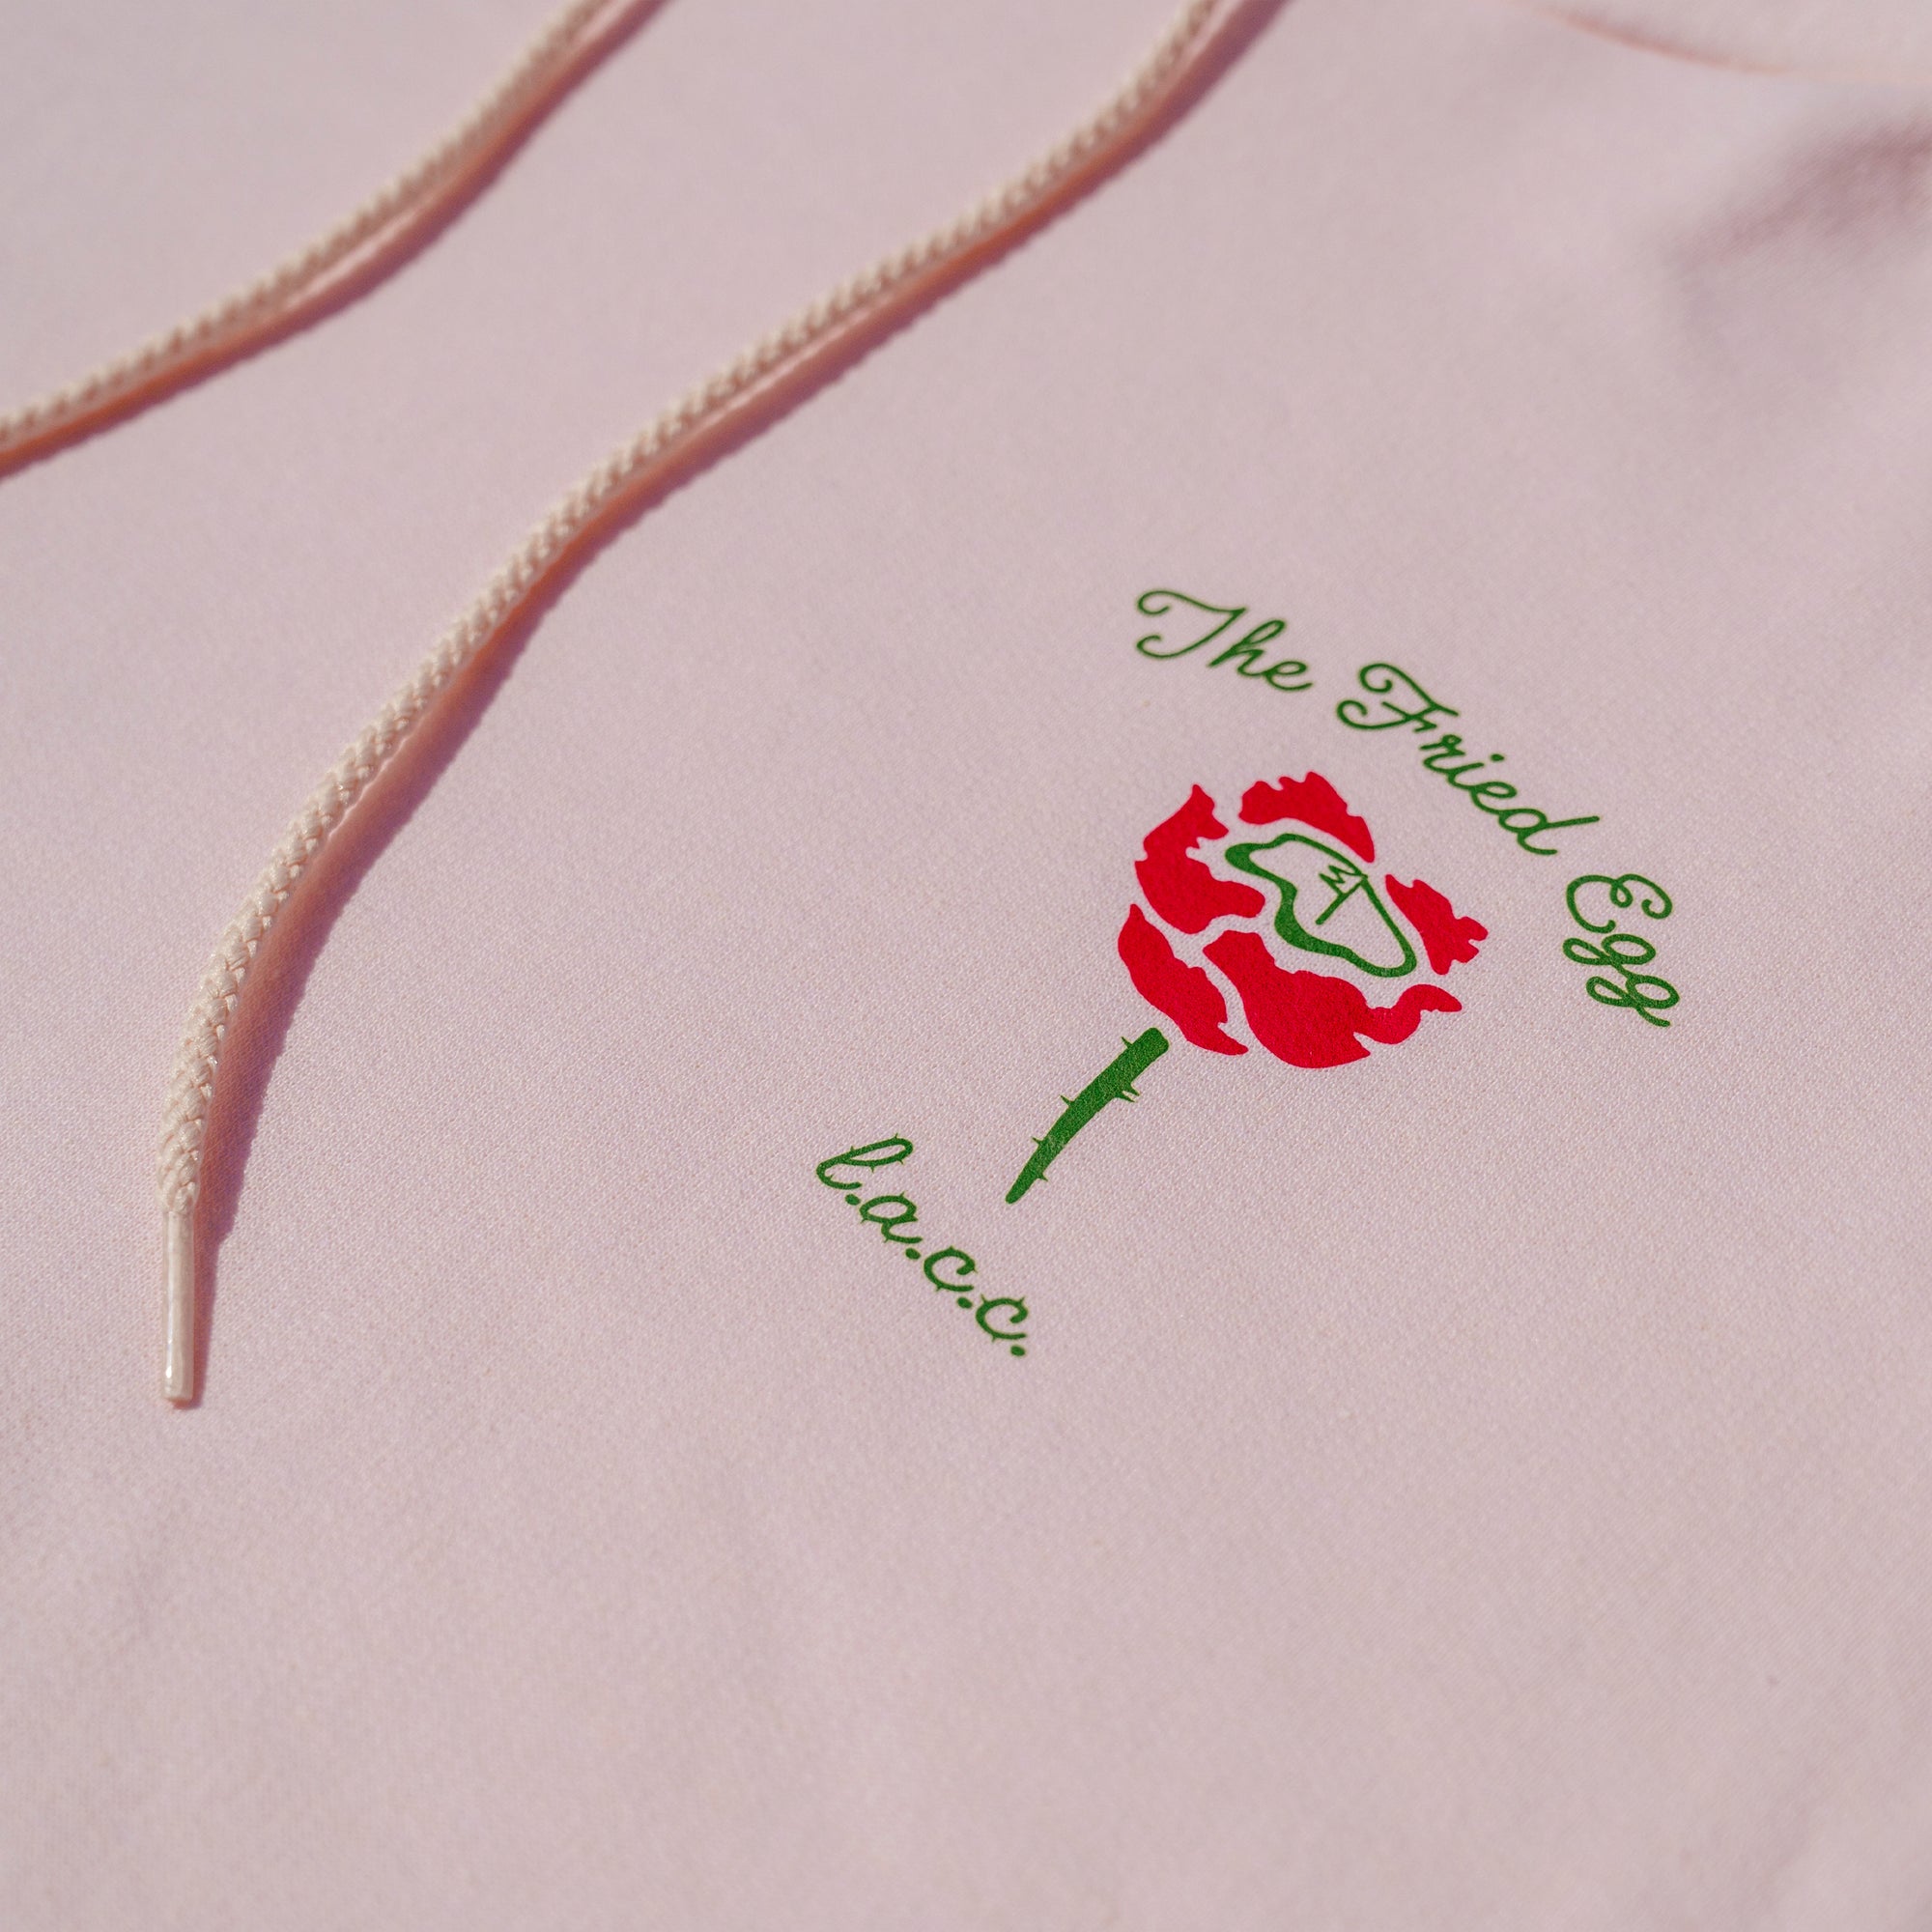 The Fried Egg Rose & Champion Hoodie